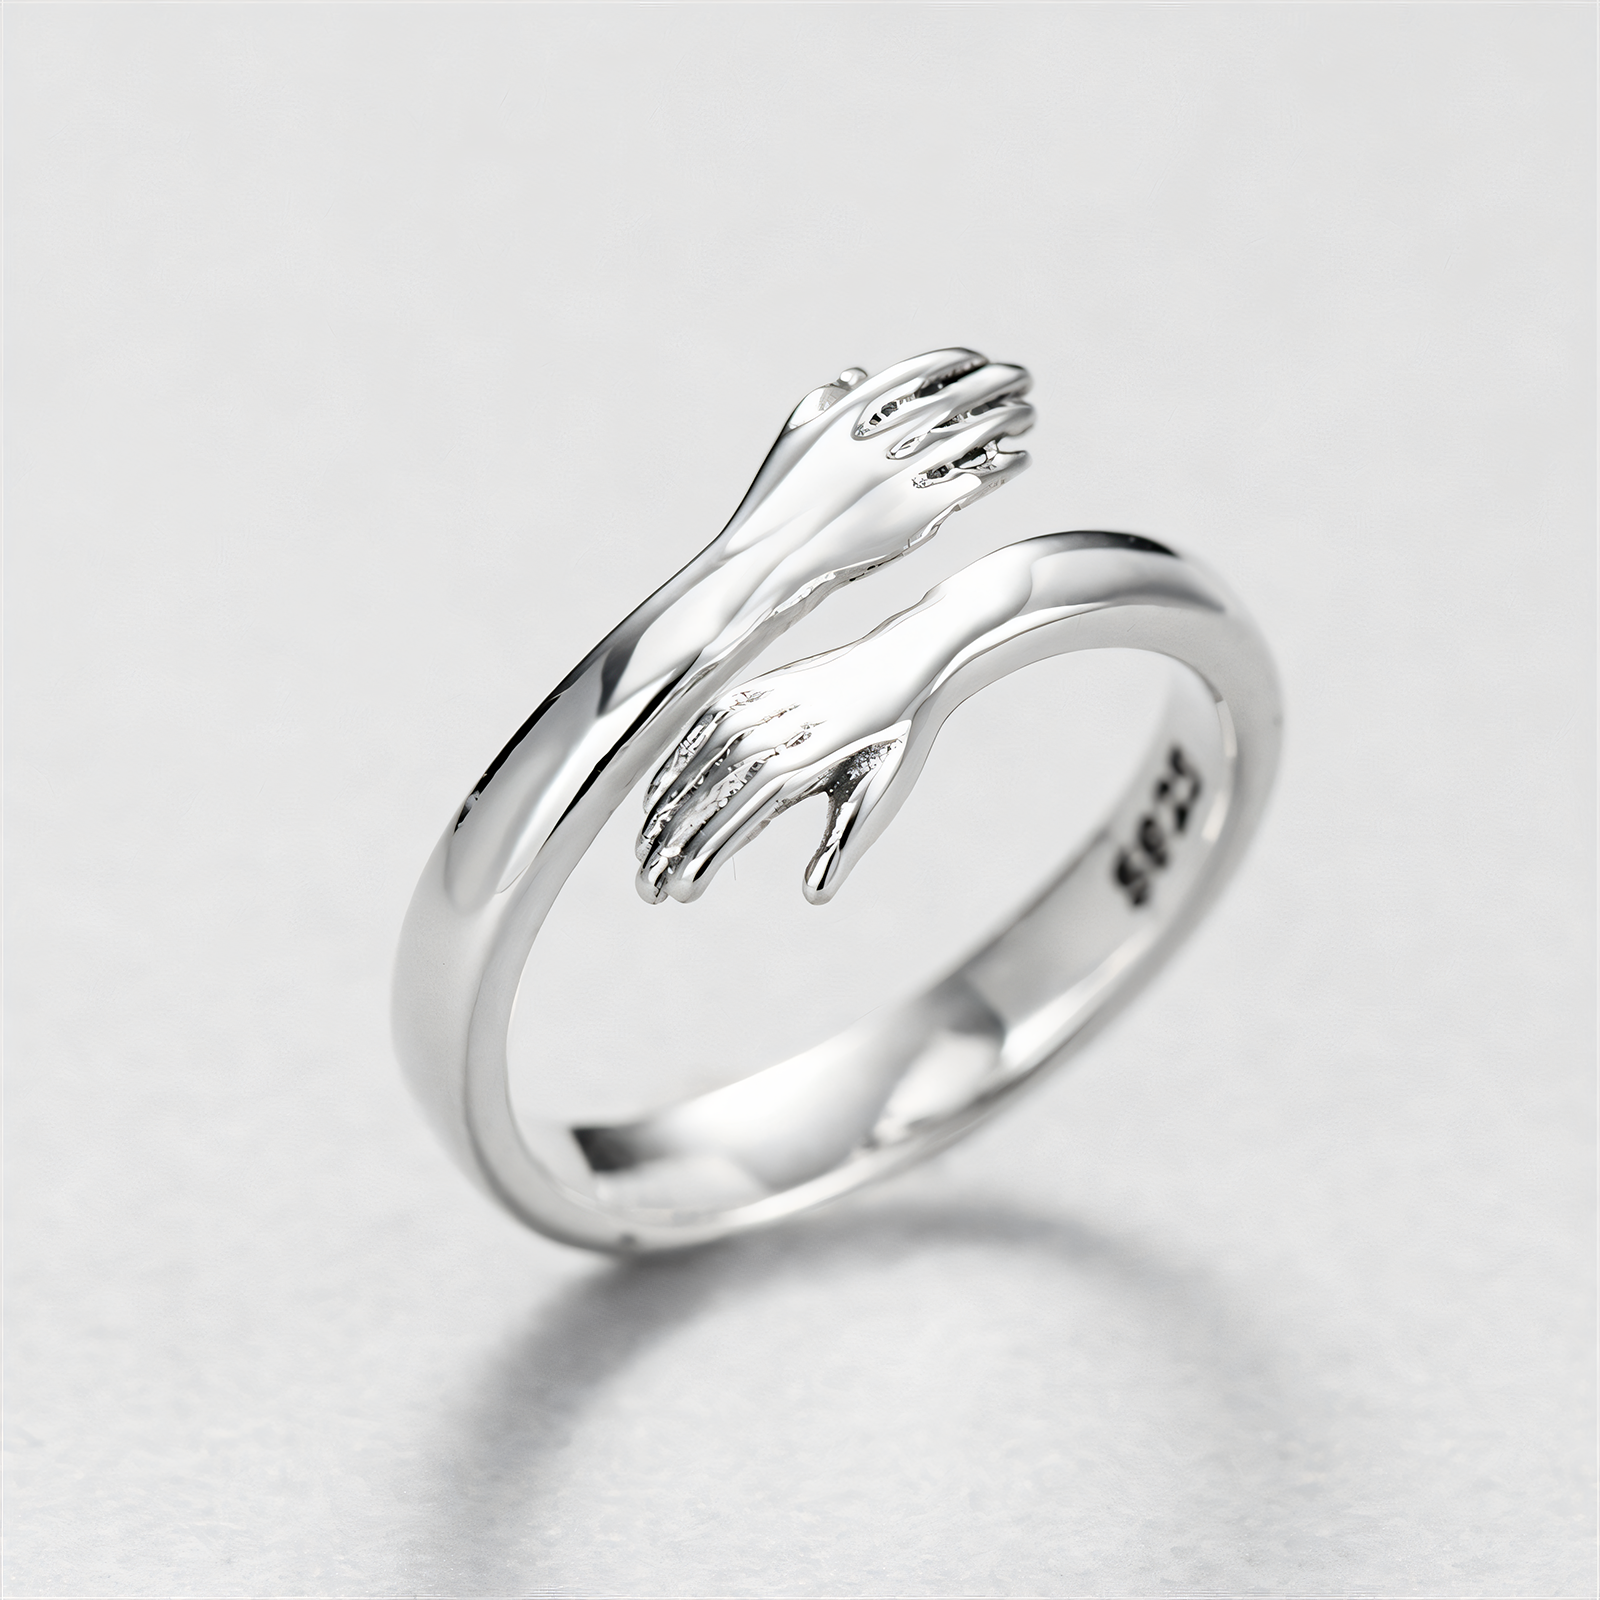 Adjustable Embracing Arms Sterling Silver Ring